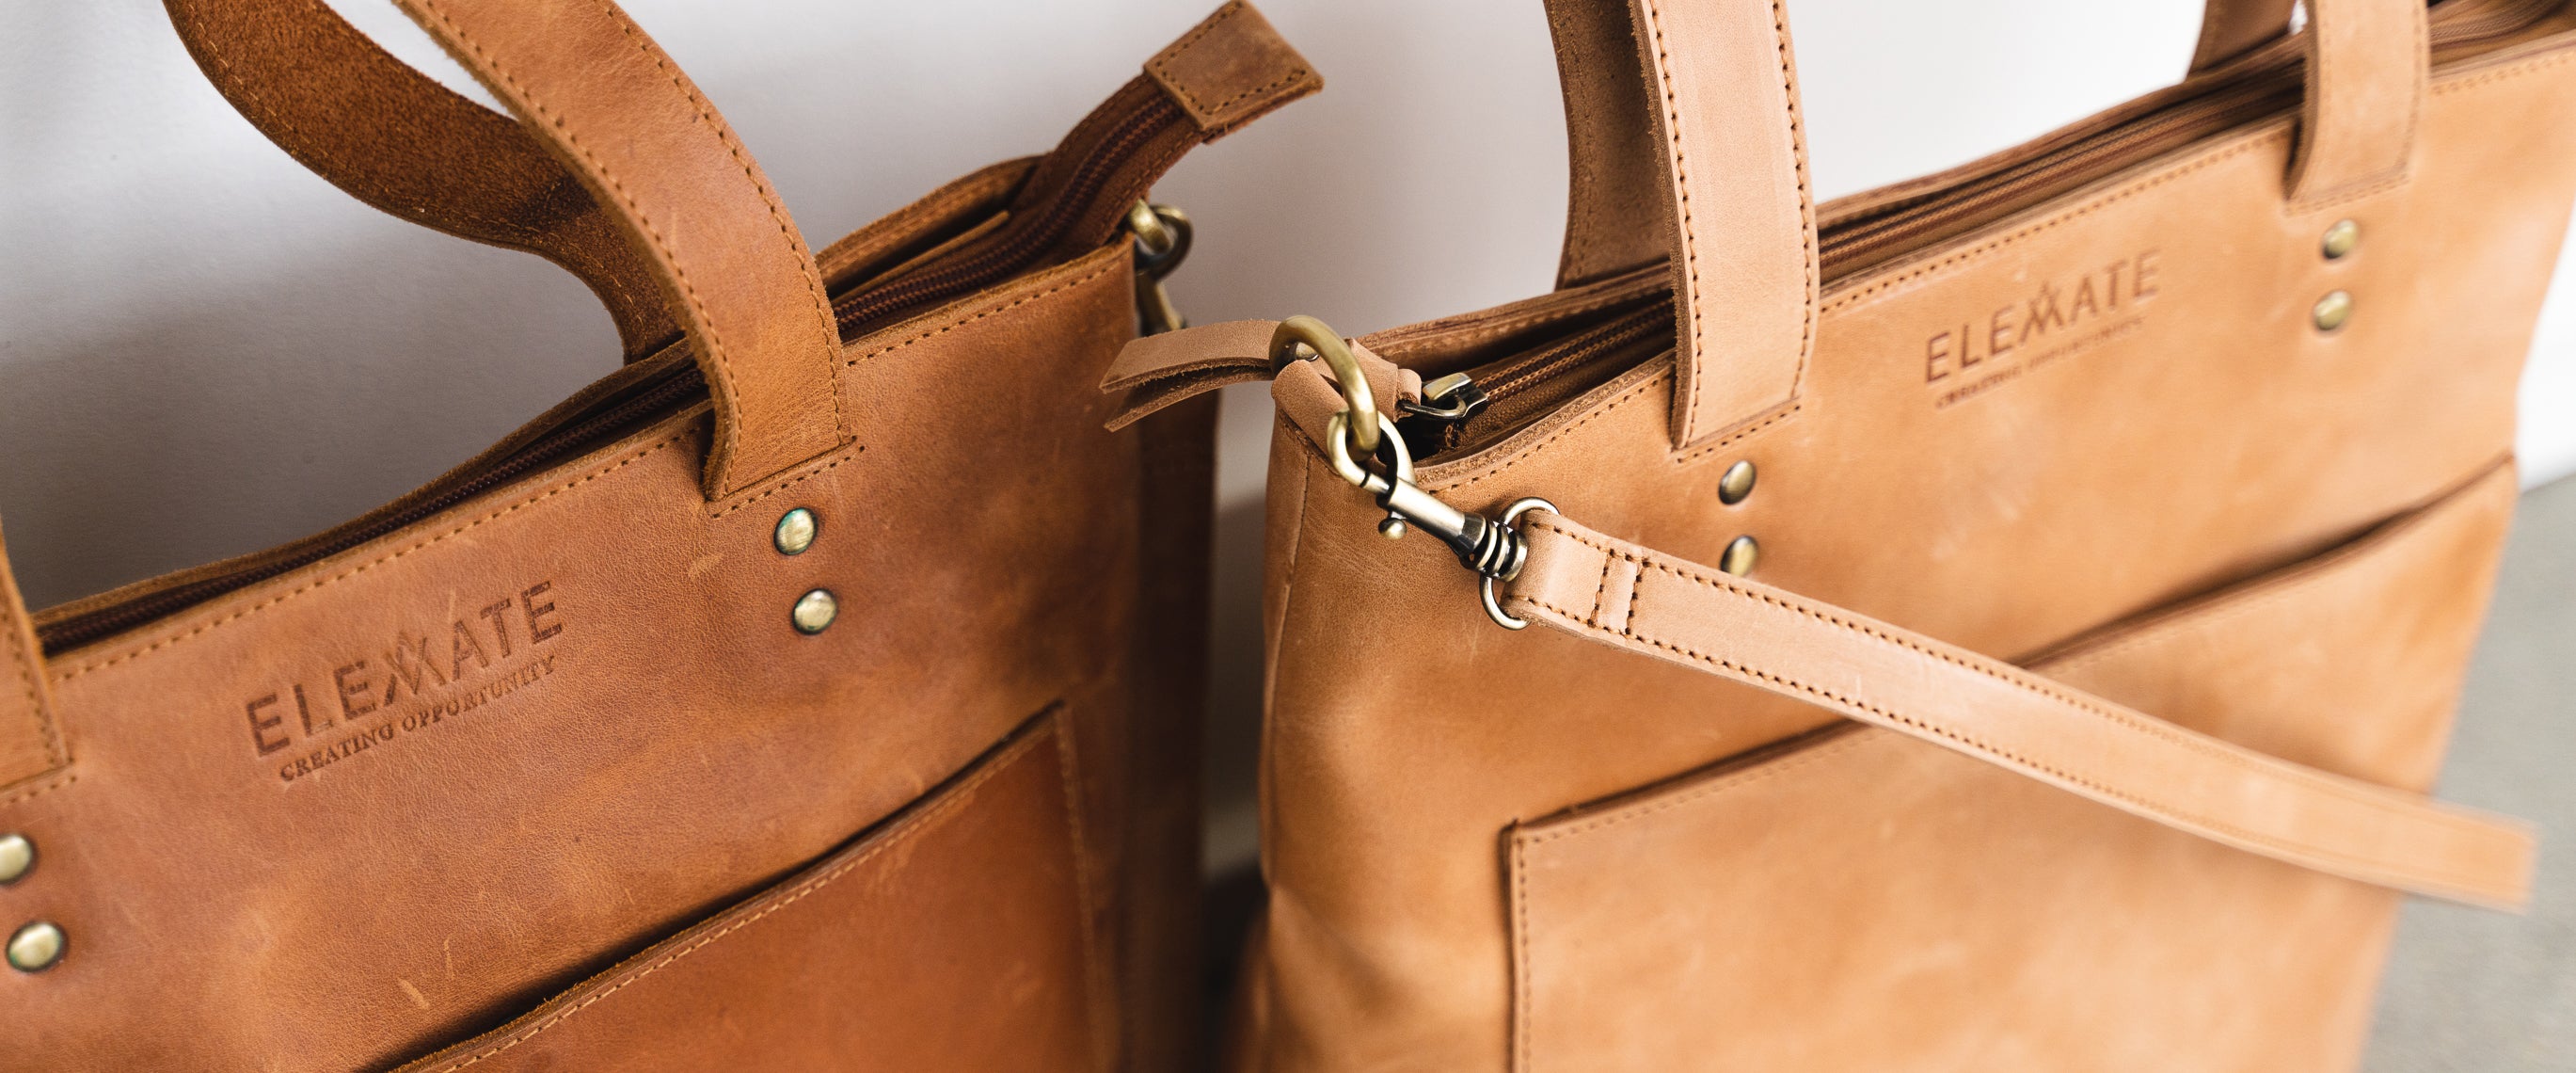 Leather Bag Care: How To Keep Hermès & More In Top Resale Condition